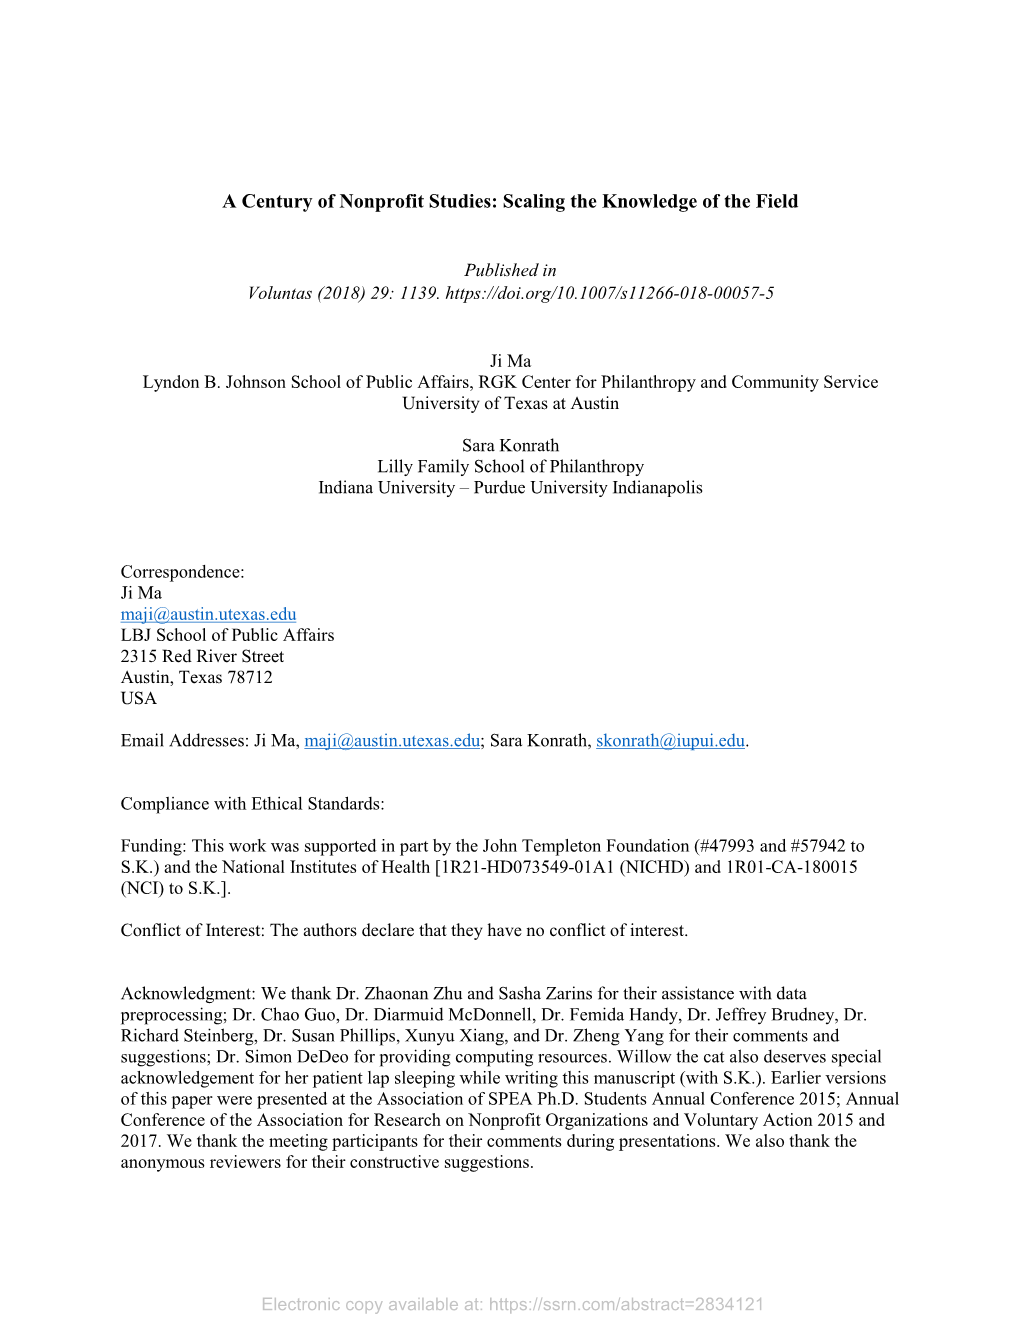 A Century of Nonprofit Studies: Scaling the Knowledge of the Field